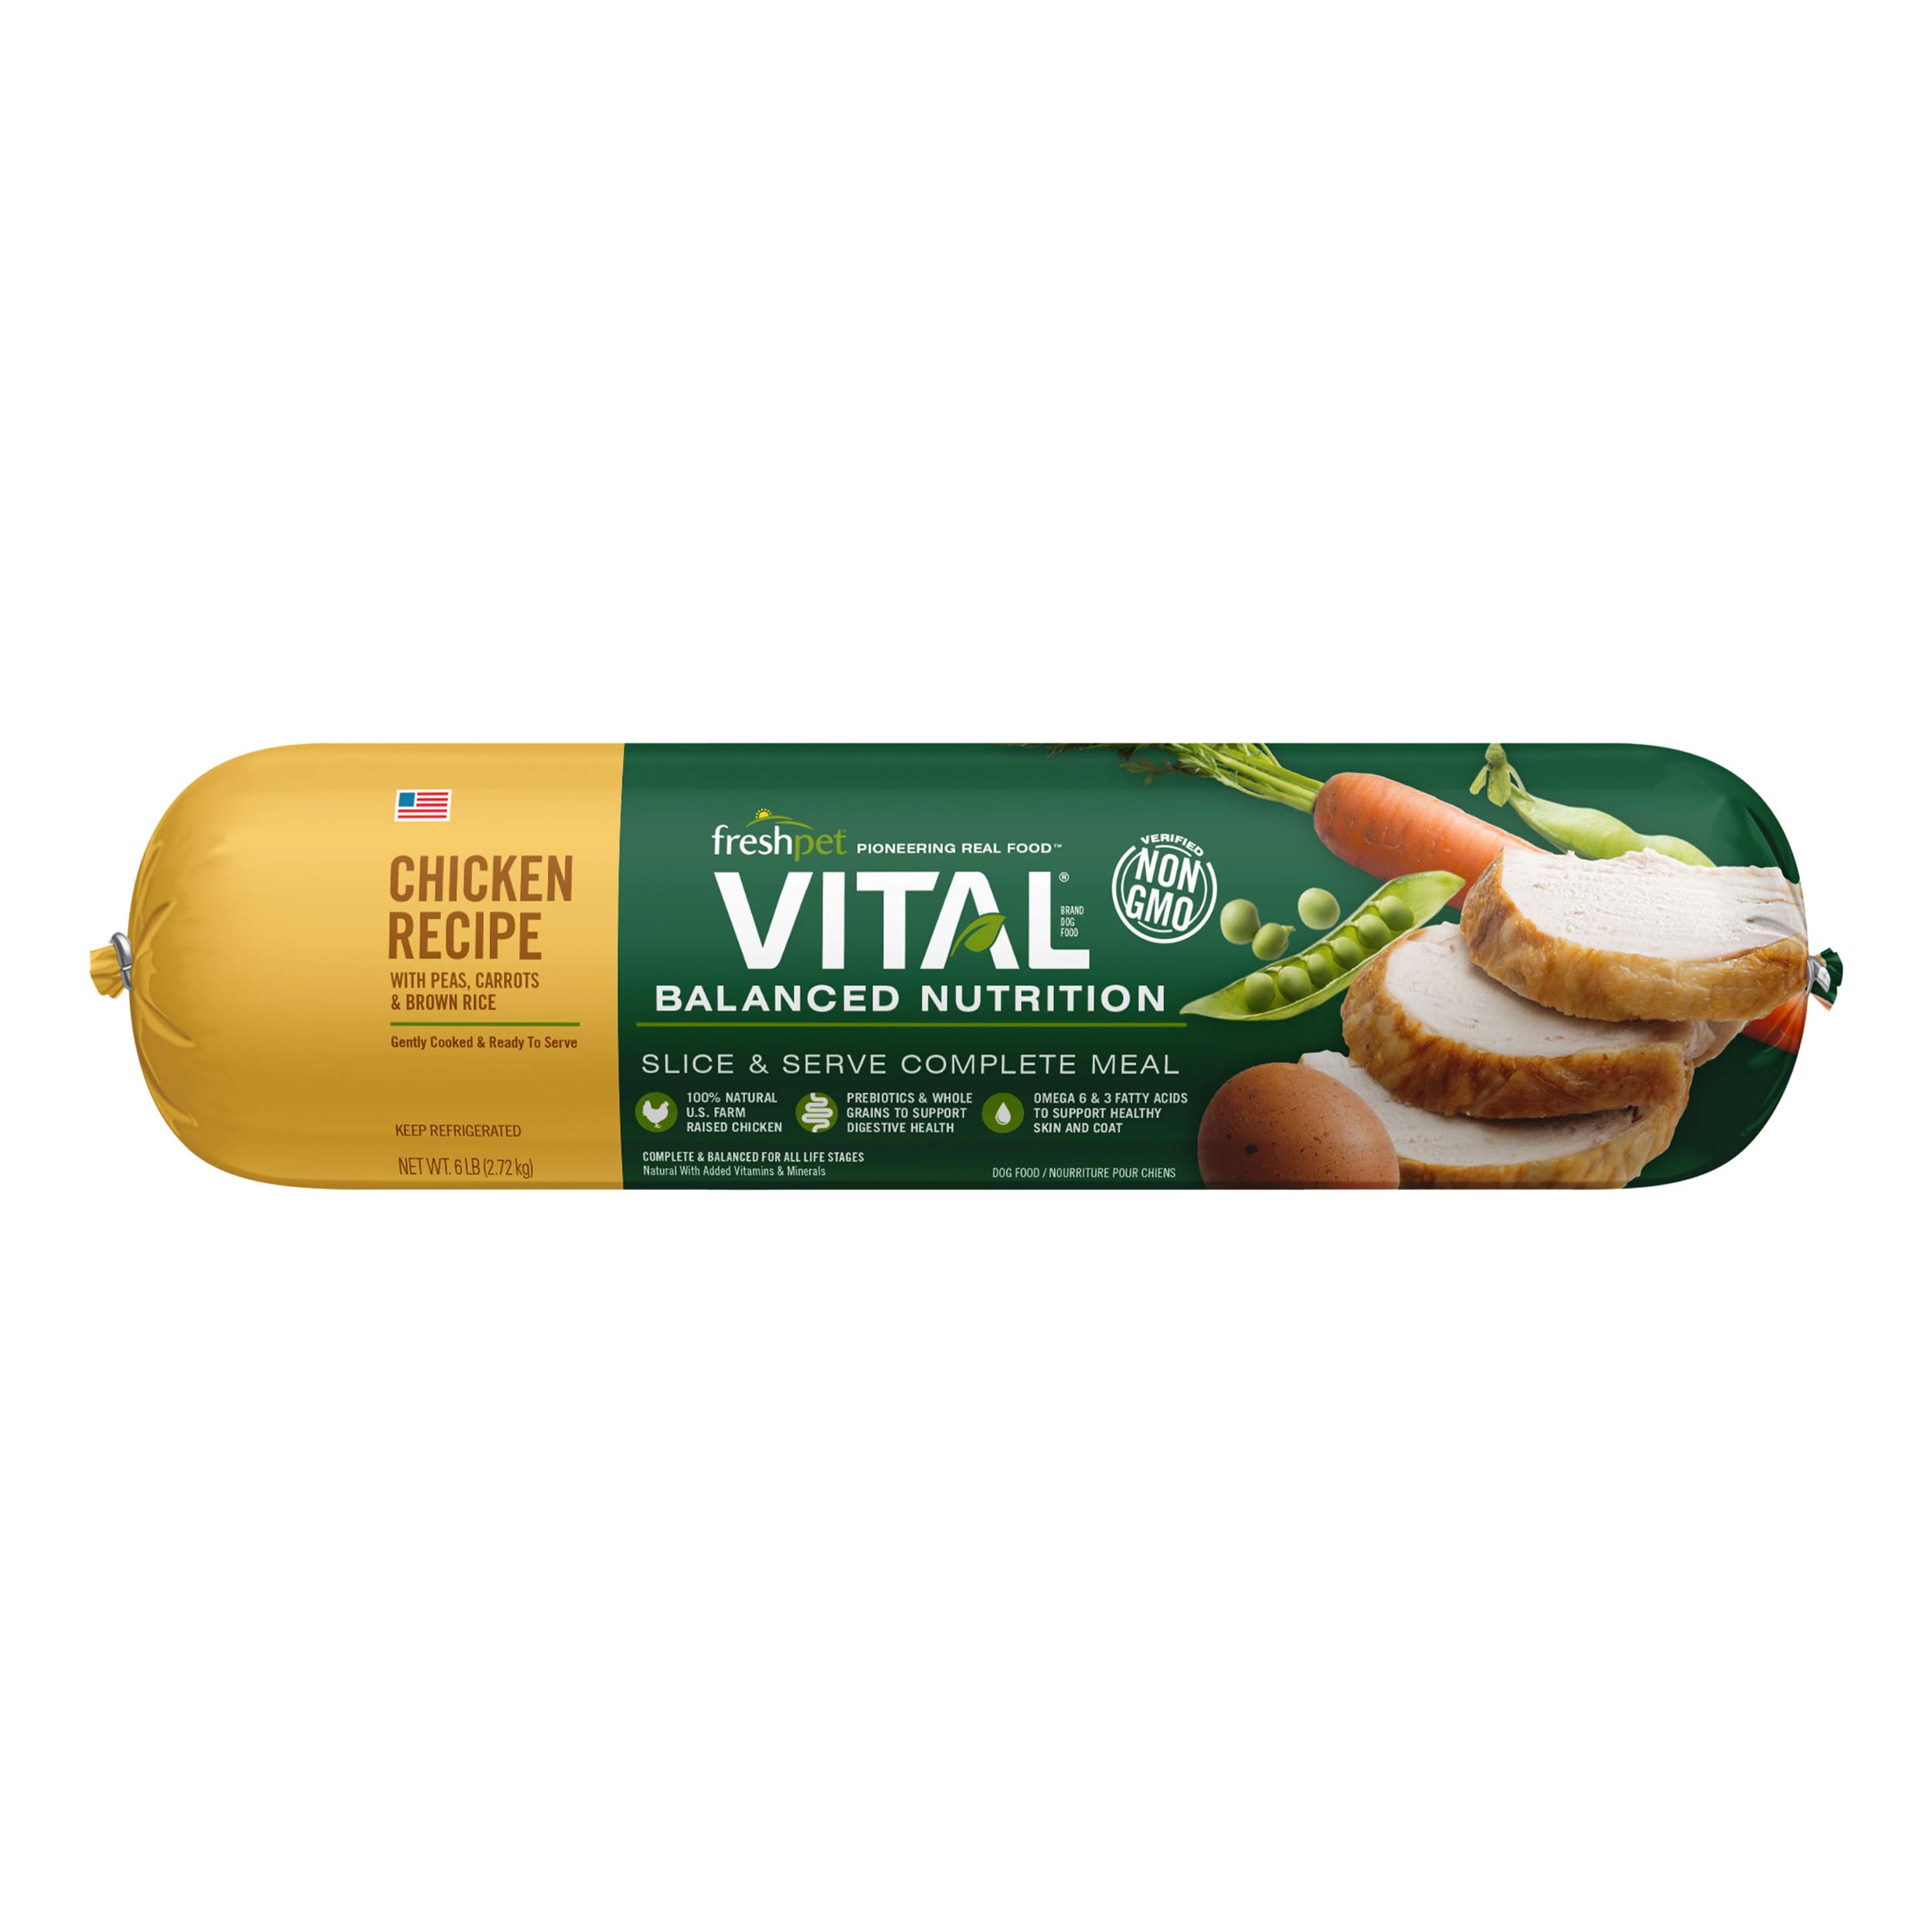 Freshpet Vital Balanced Nutrition Chicken and Whole Grain Fresh Dog Food, 6 Pounds- Not Available for Delivery